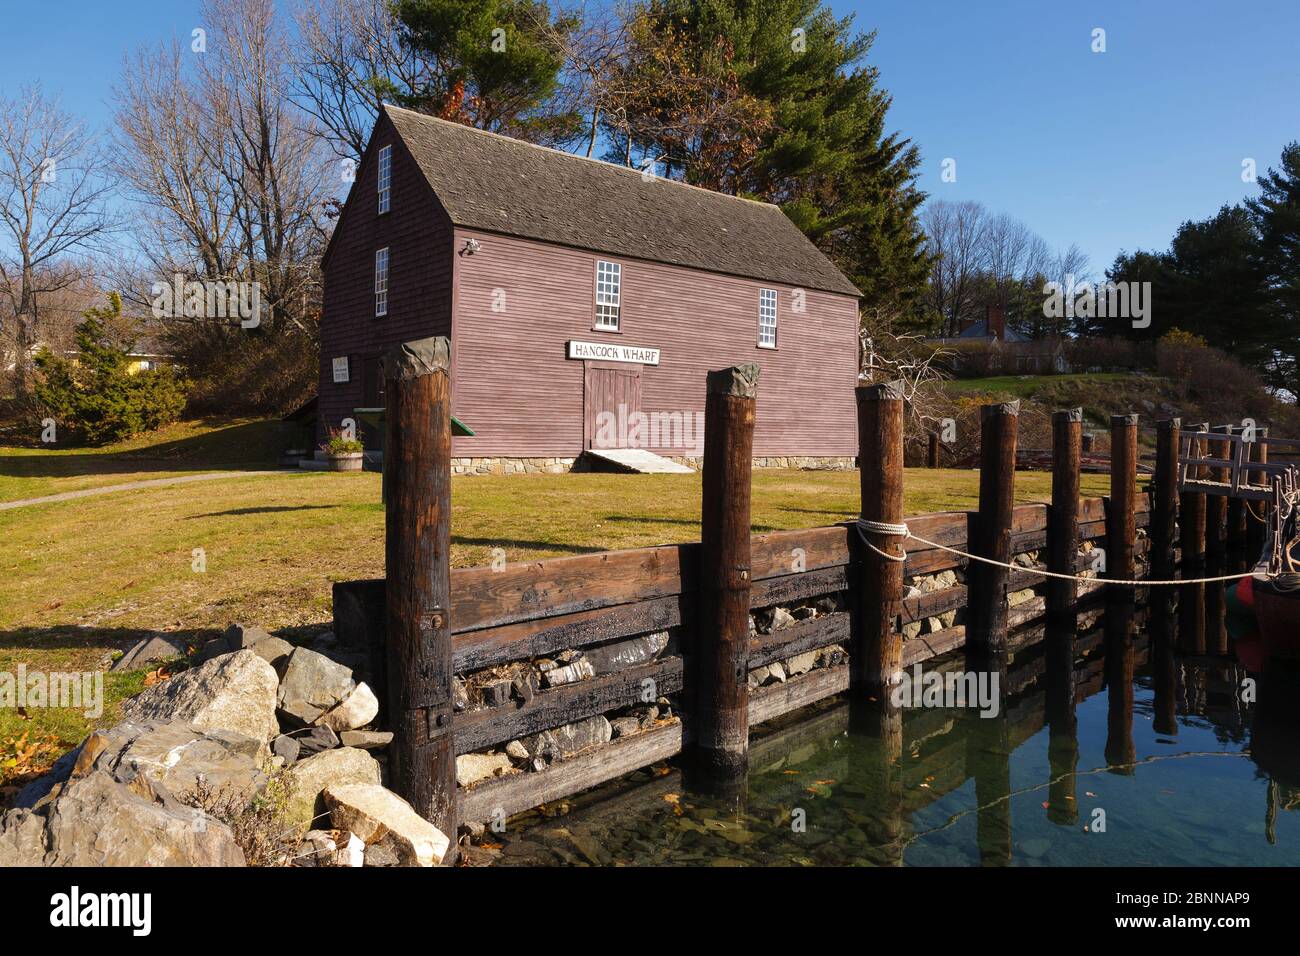 The John Hancock Warehouse and Wharf in York, Maine. Built in the 18th-century, and added to the National Registry of Historic Places in 1969, this is Stock Photo